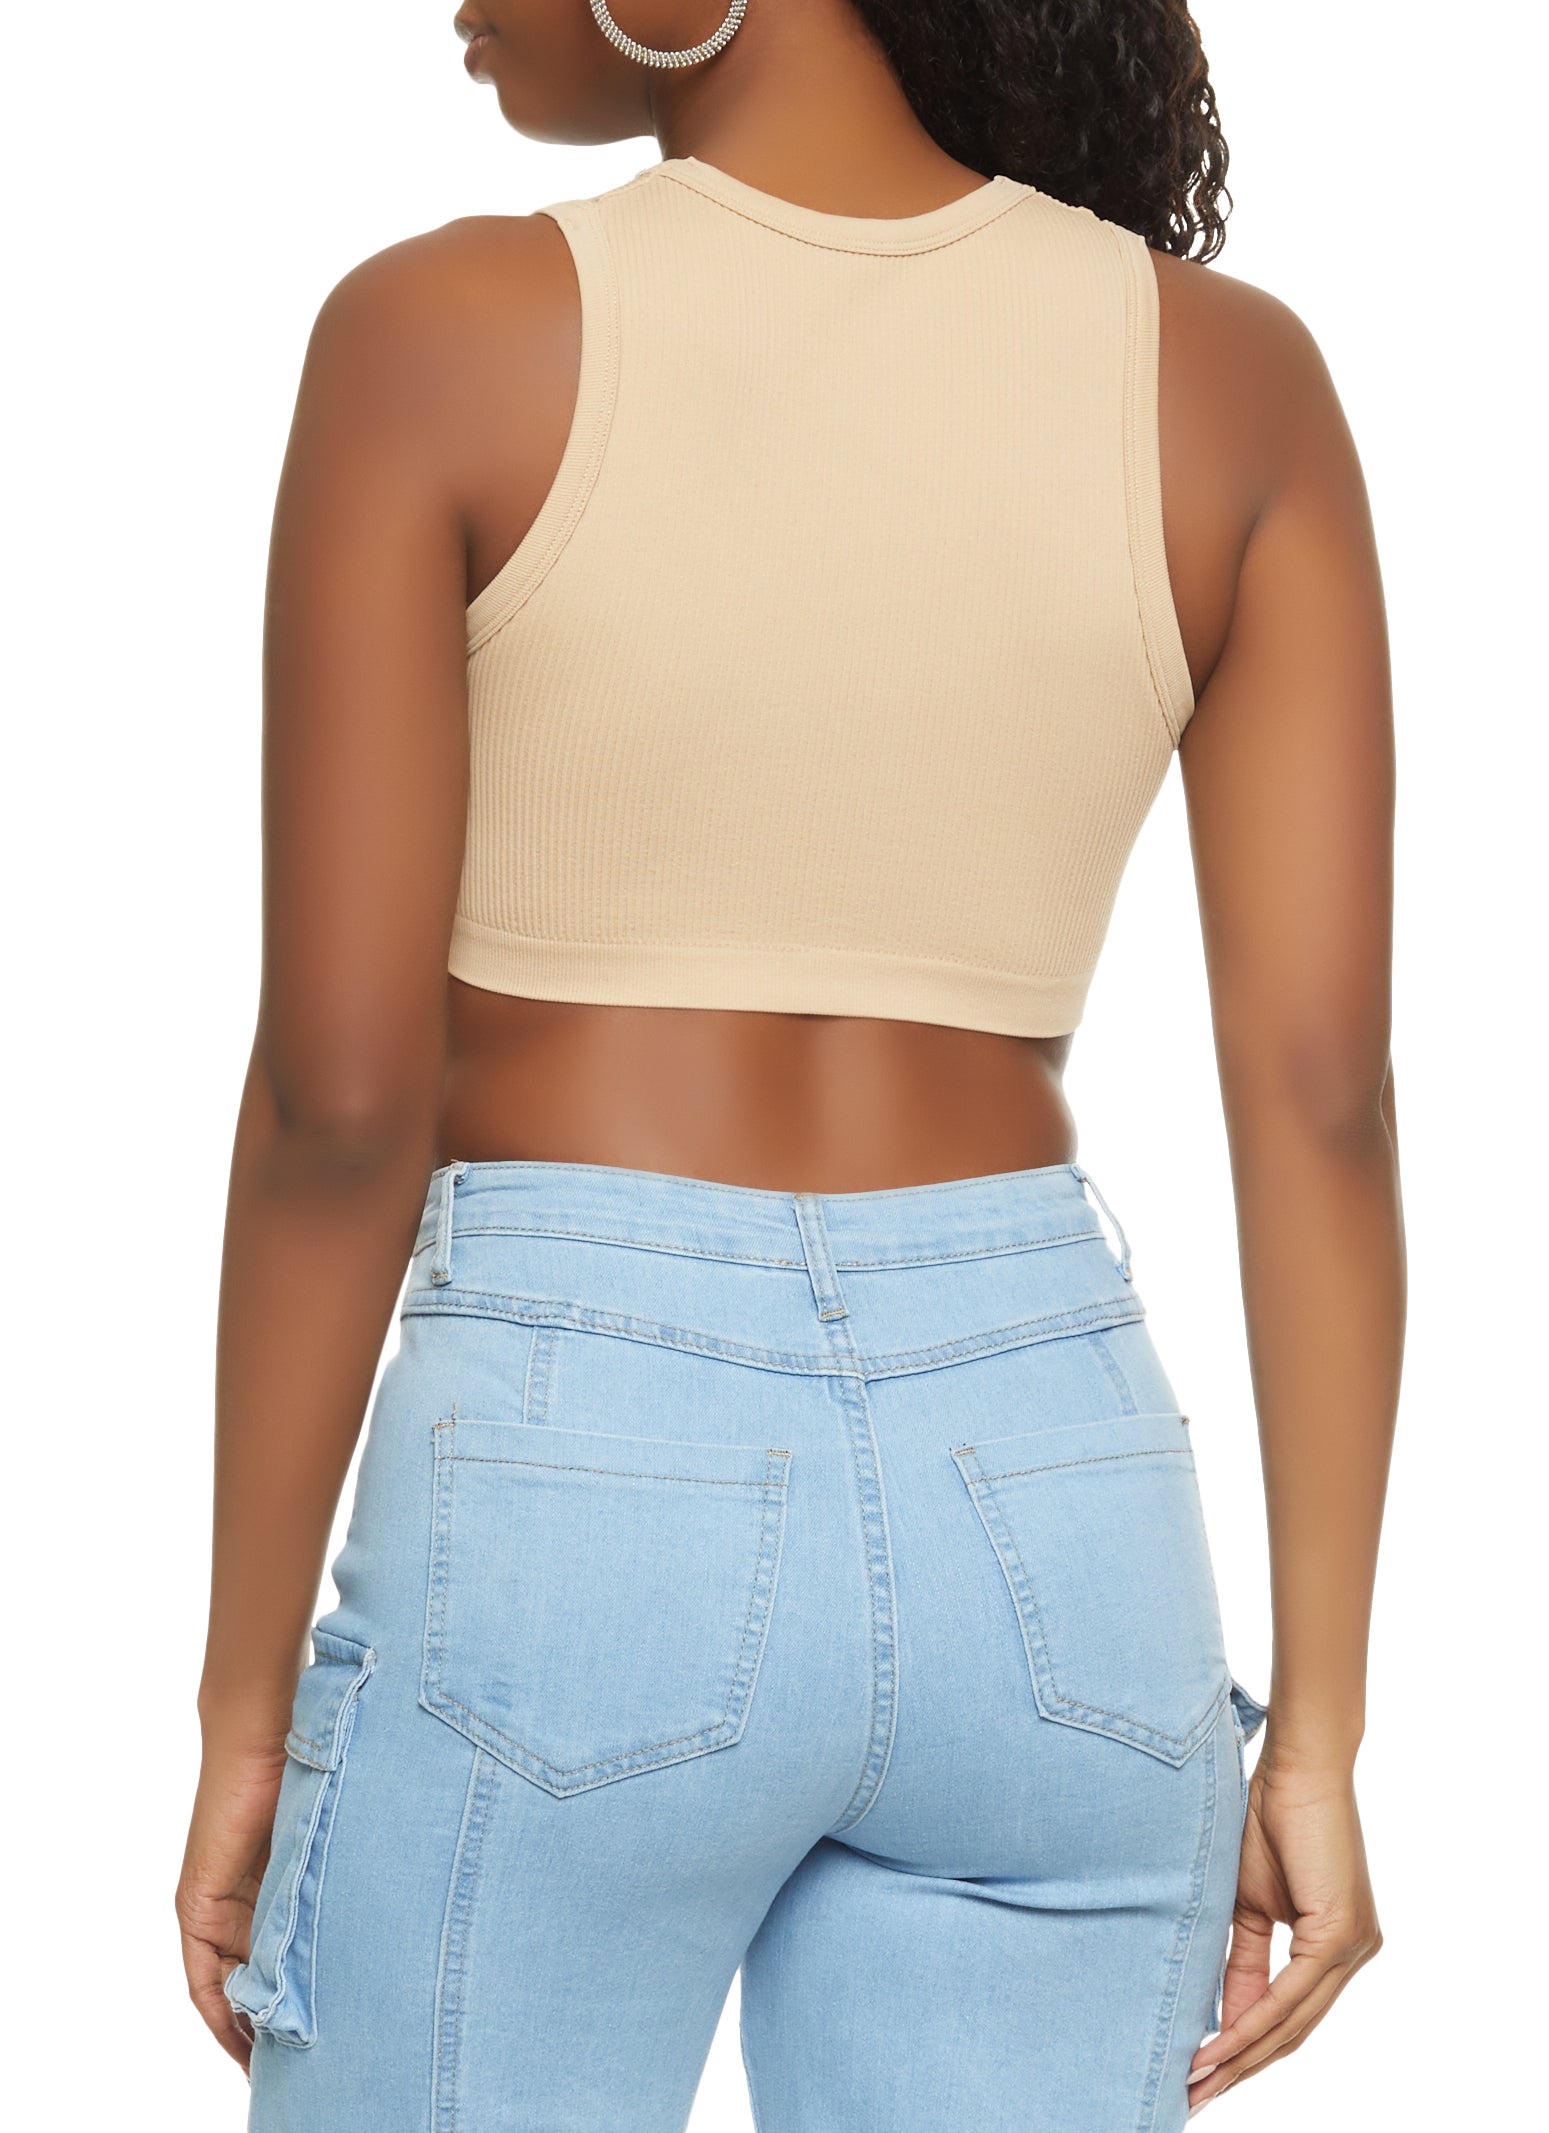 Sleeveless Tank RIBBED HIGH NECK RACER BACK crop top Vest round